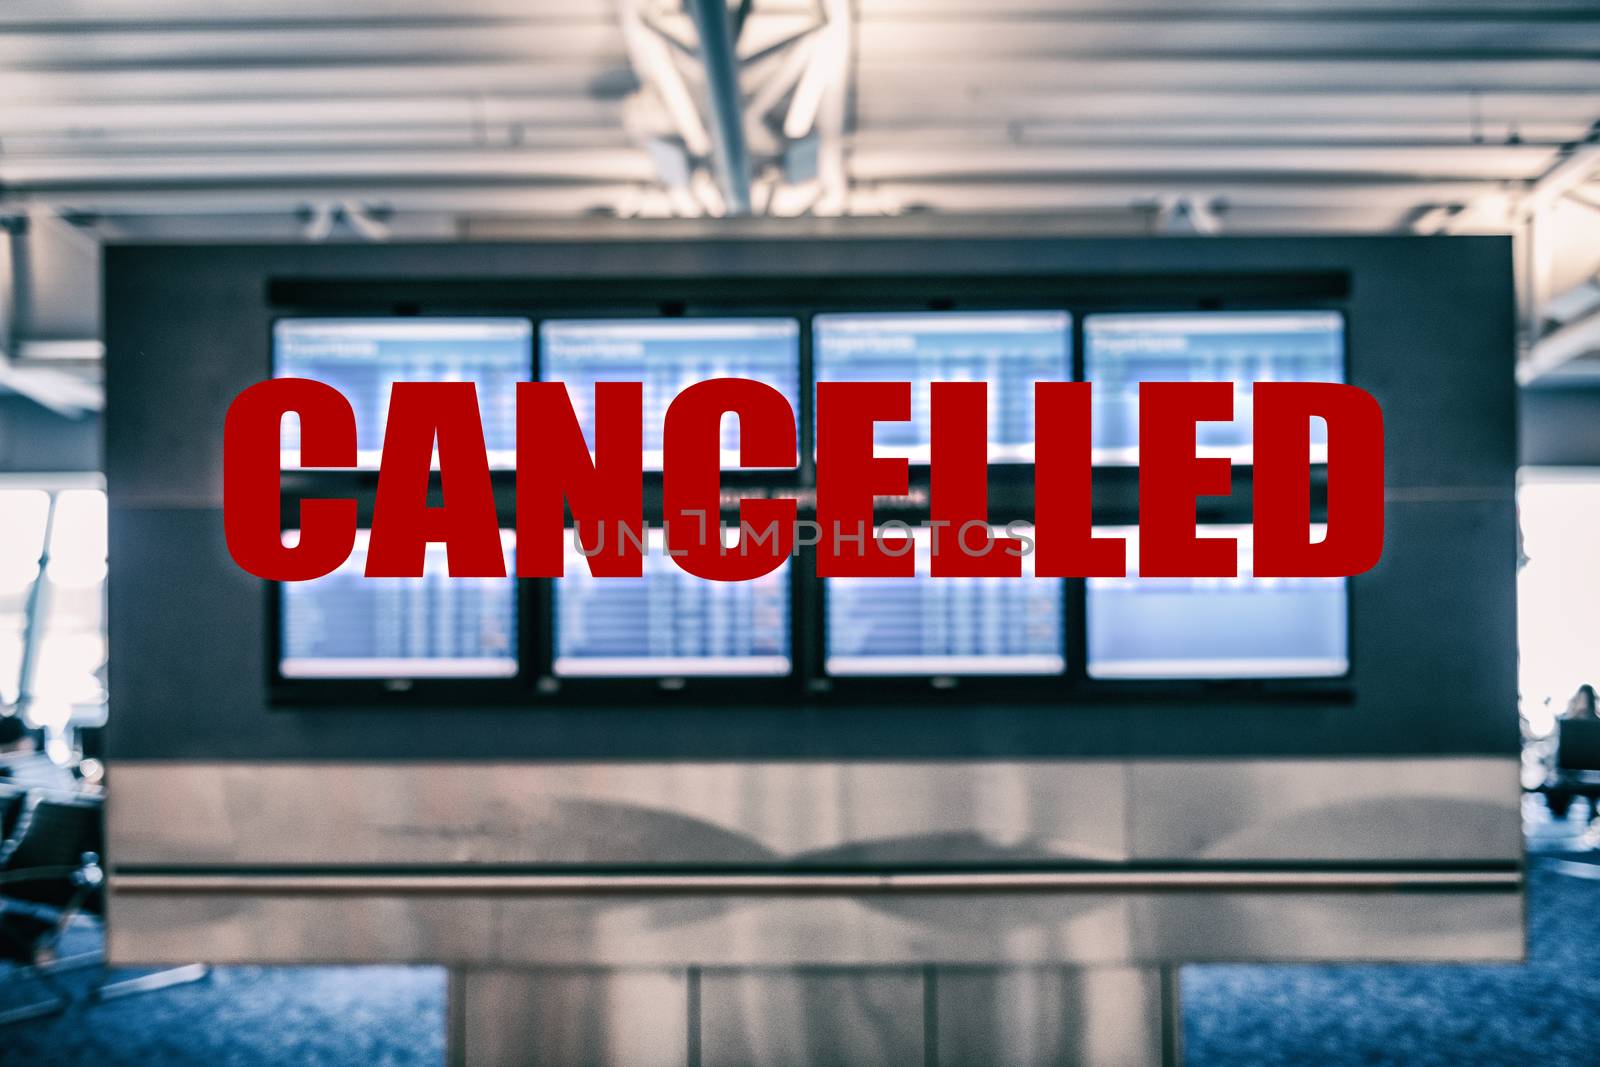 Canceled flights from China in Europe airports. Travel vacations cancelled for fear of spreading coronavirus Airport terminal screens showing departures and arrivals of planes with title in red by Maridav